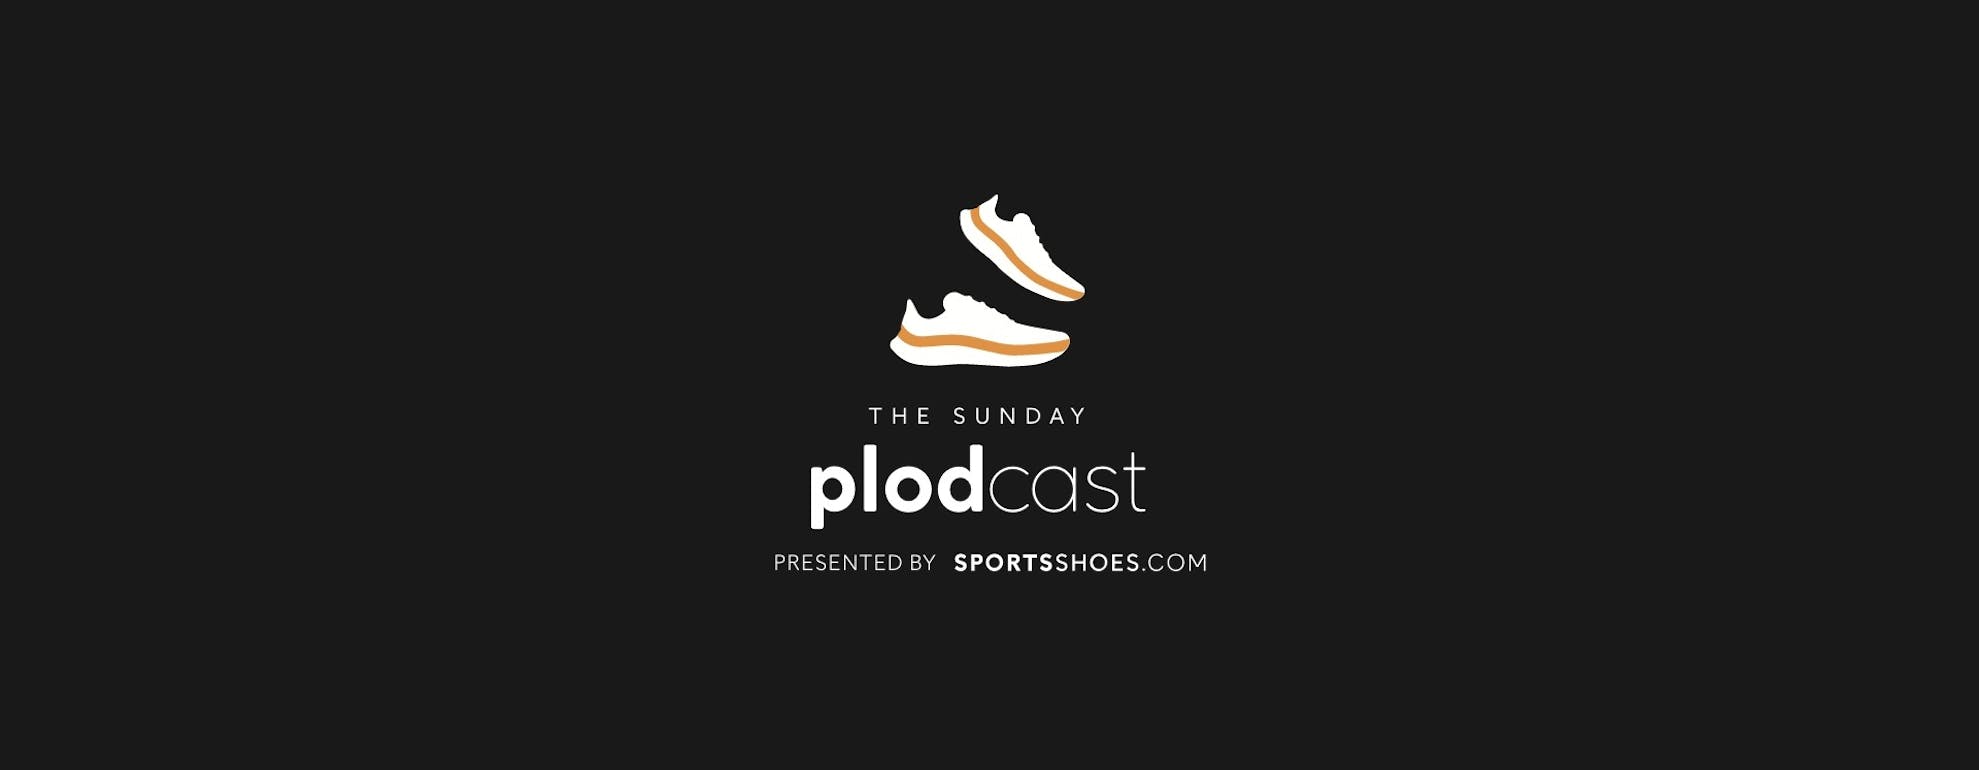 The Sunday Plodcast: Presented by SportsShoes